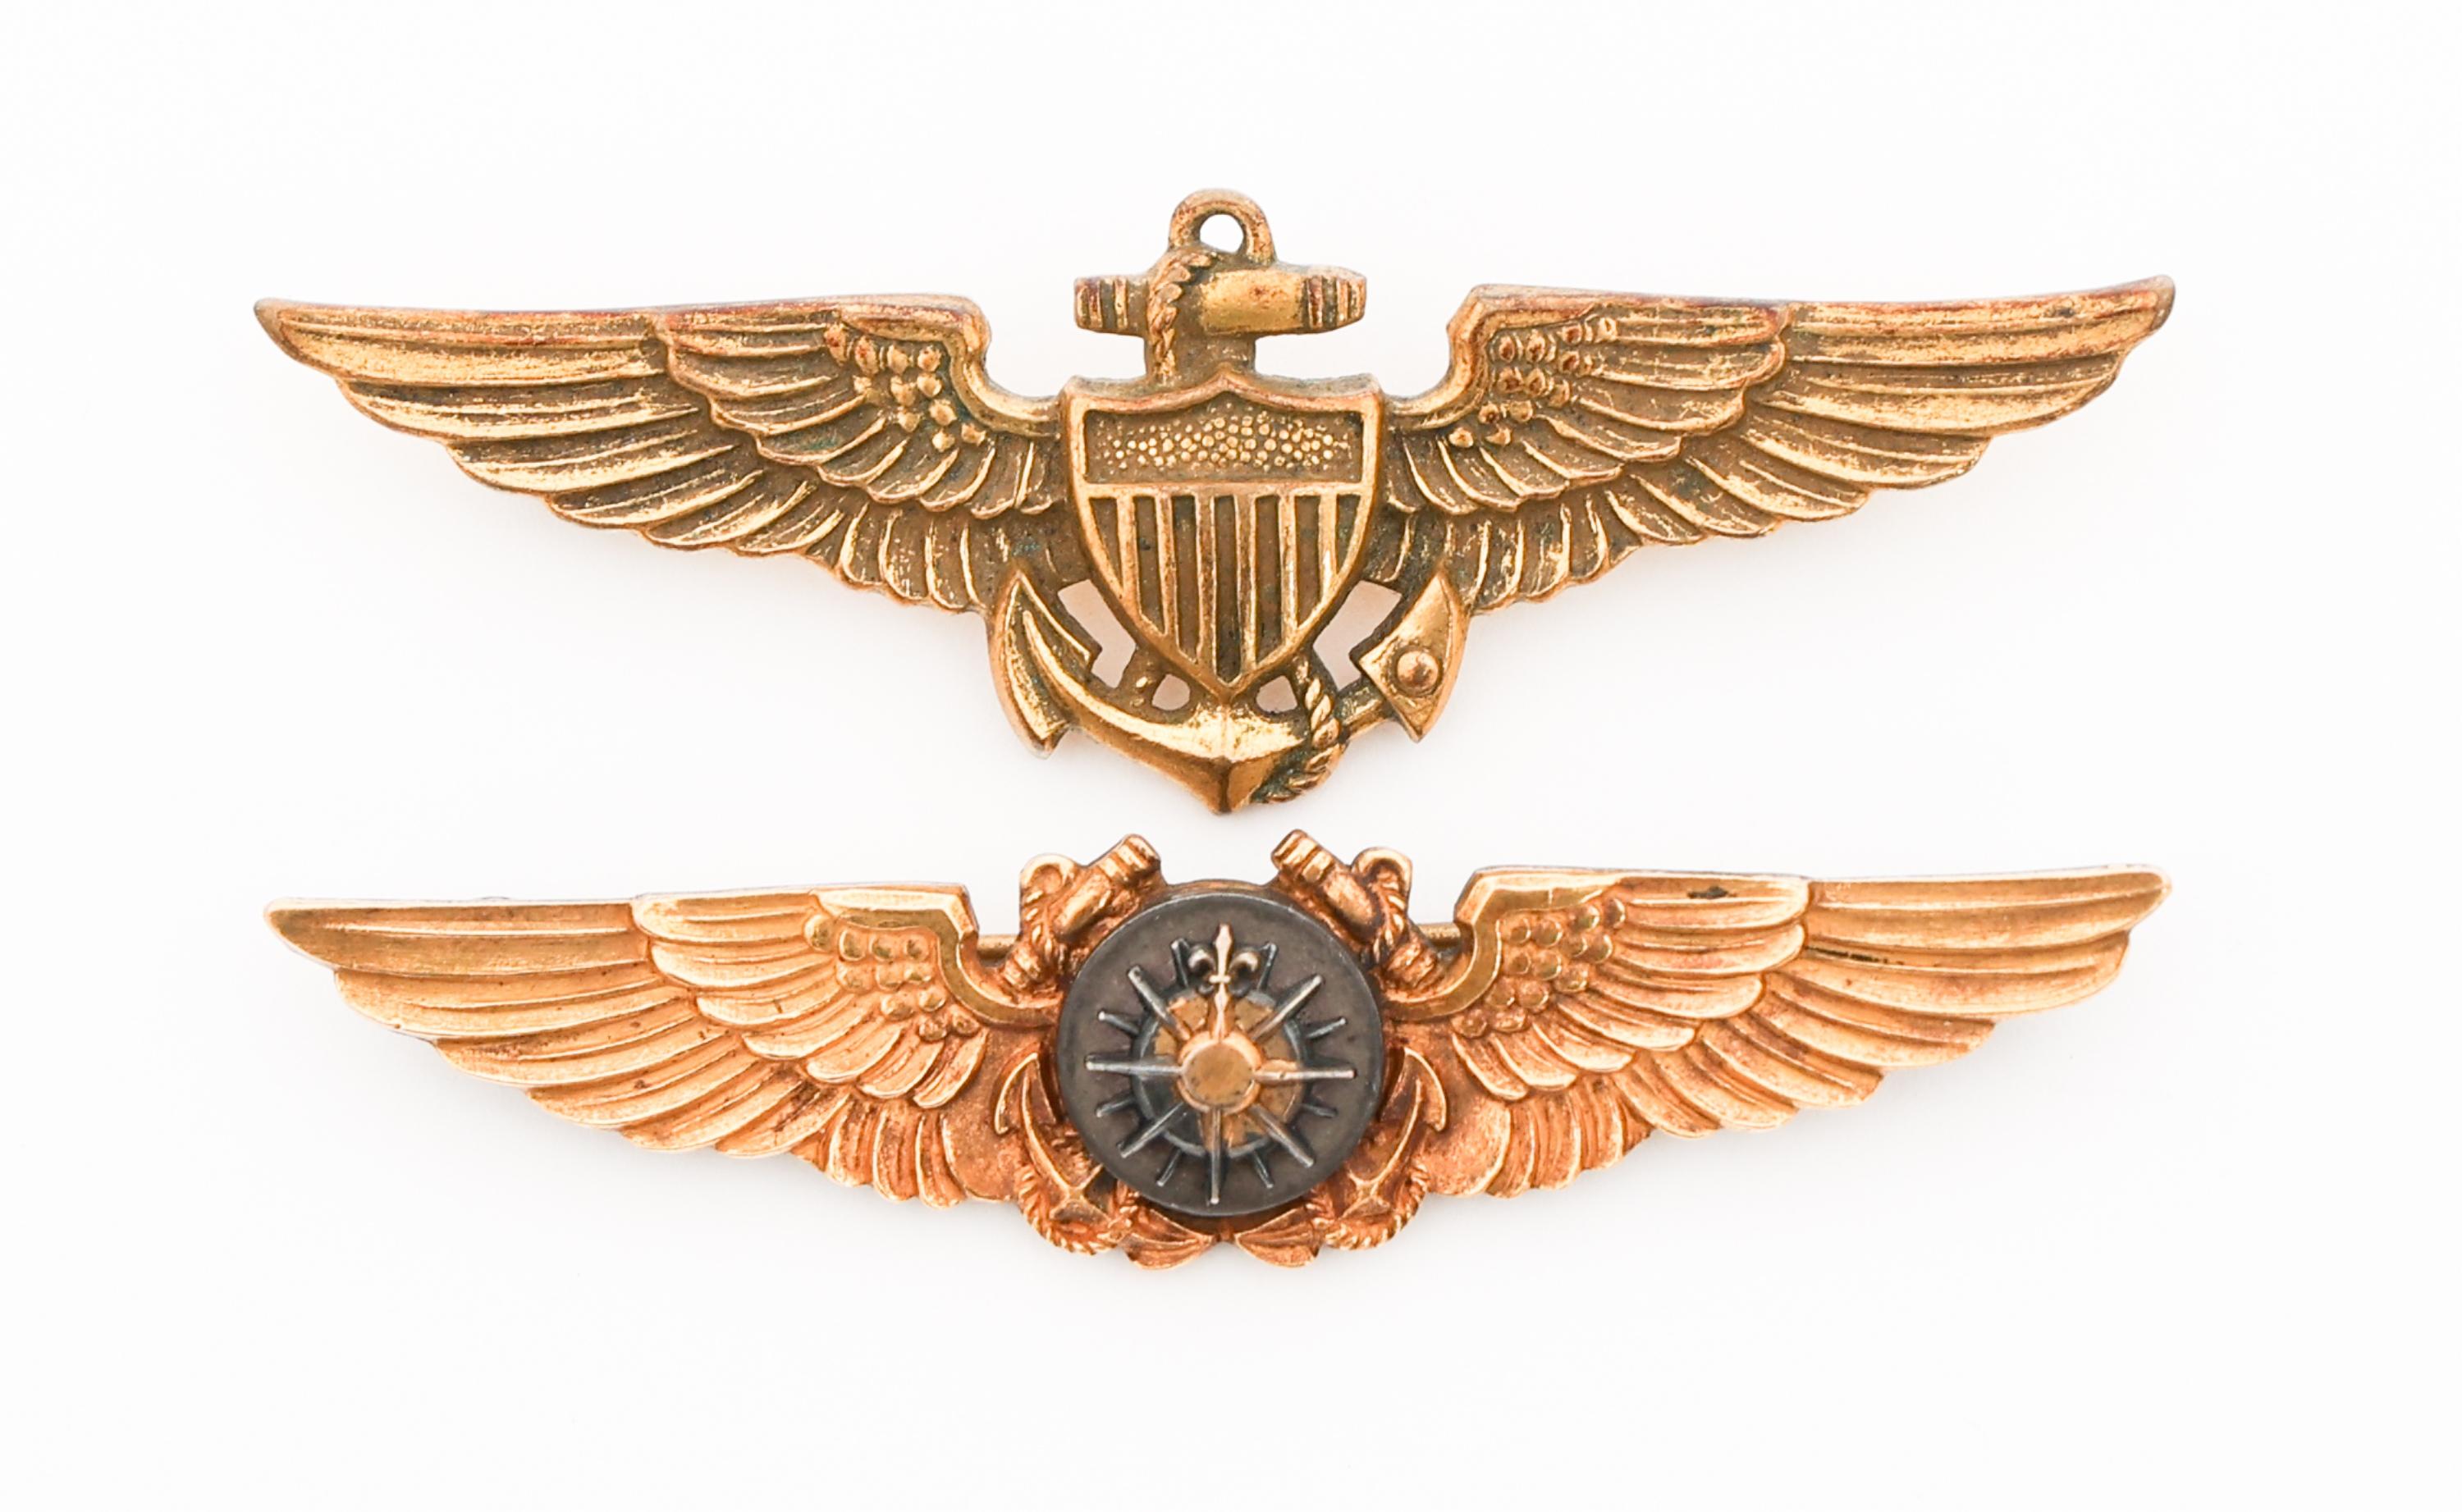 WWII US NAVY AVIATION QUALIFICATION WINGS